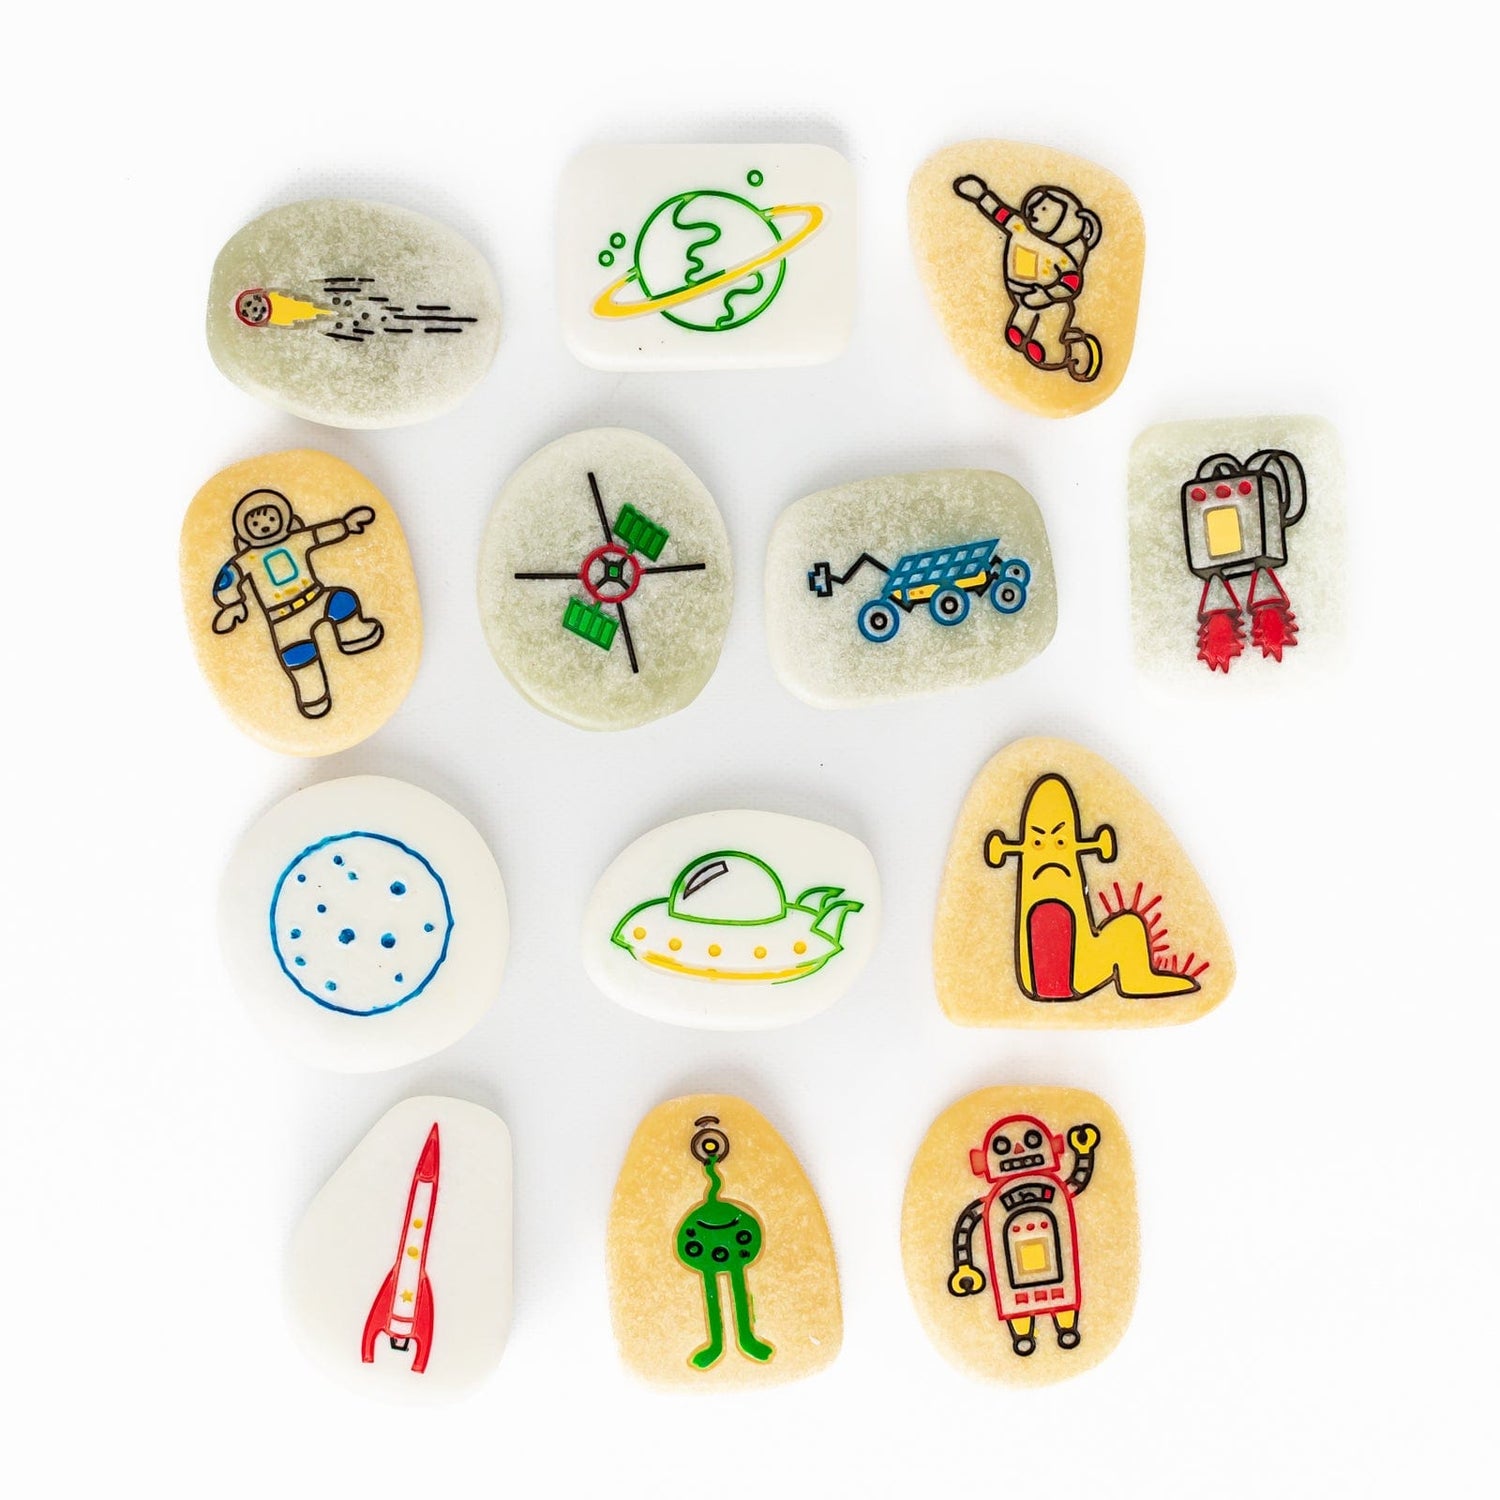 Yellow Door Sensory Play Outer Space Story Stones (Set of 13)